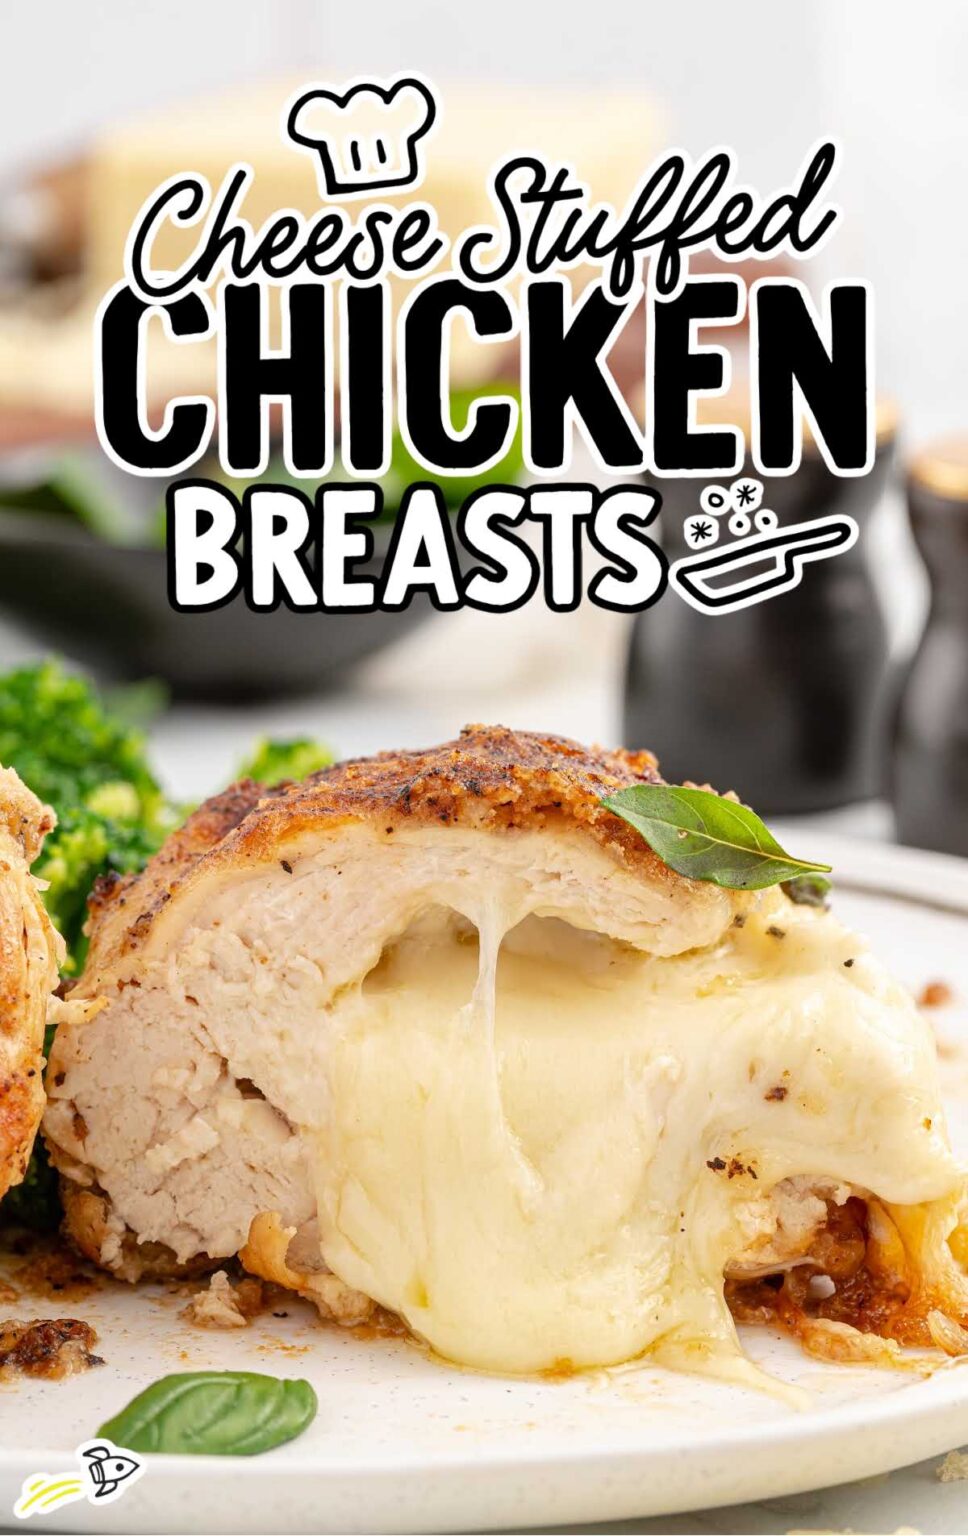 Cheese Stuffed Chicken Breasts - Spaceships and Laser Beams